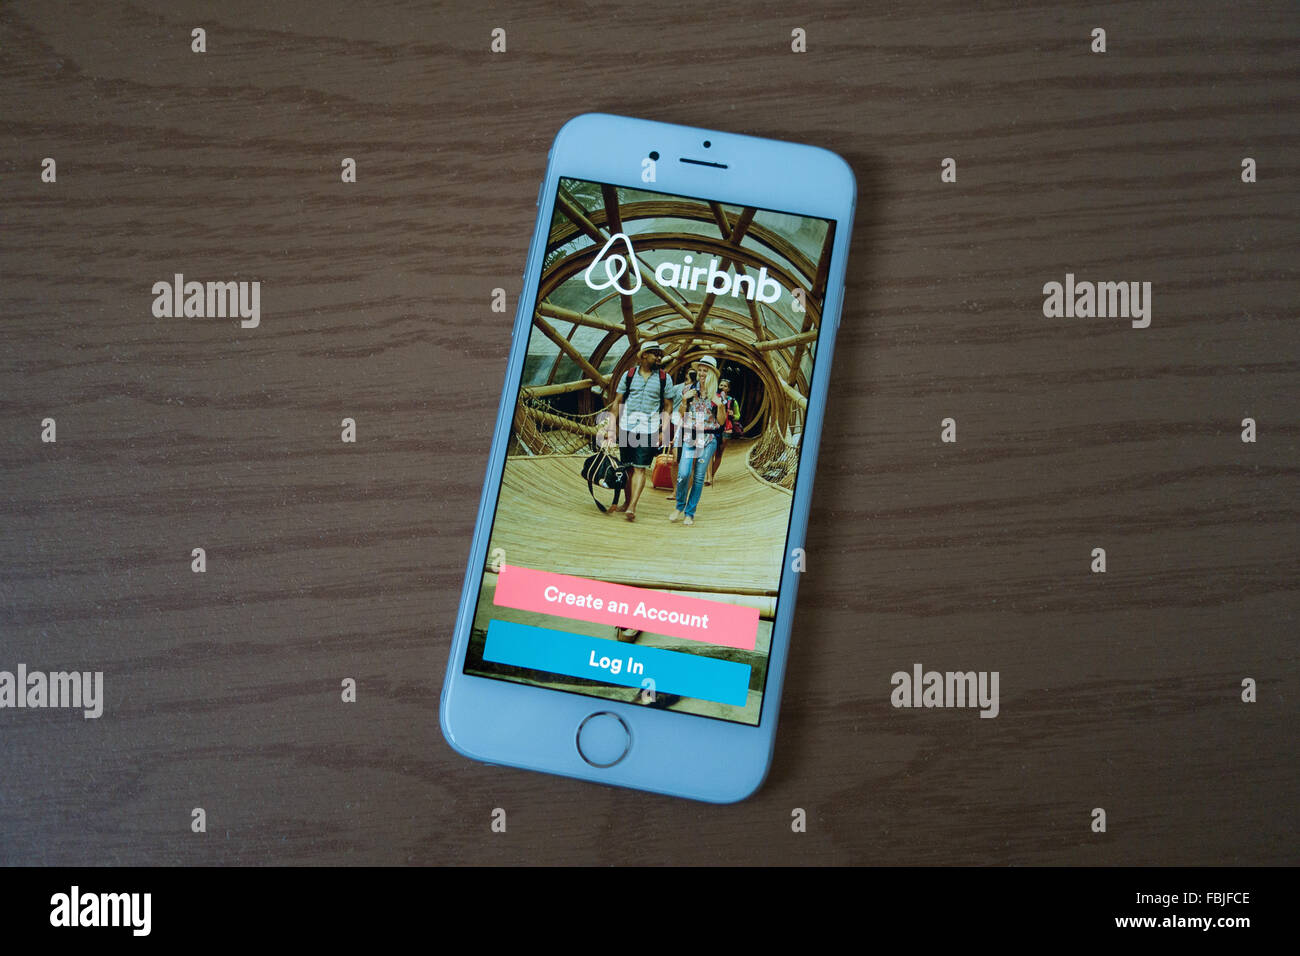 Airbnb smart phone app iphone Banque D'Images